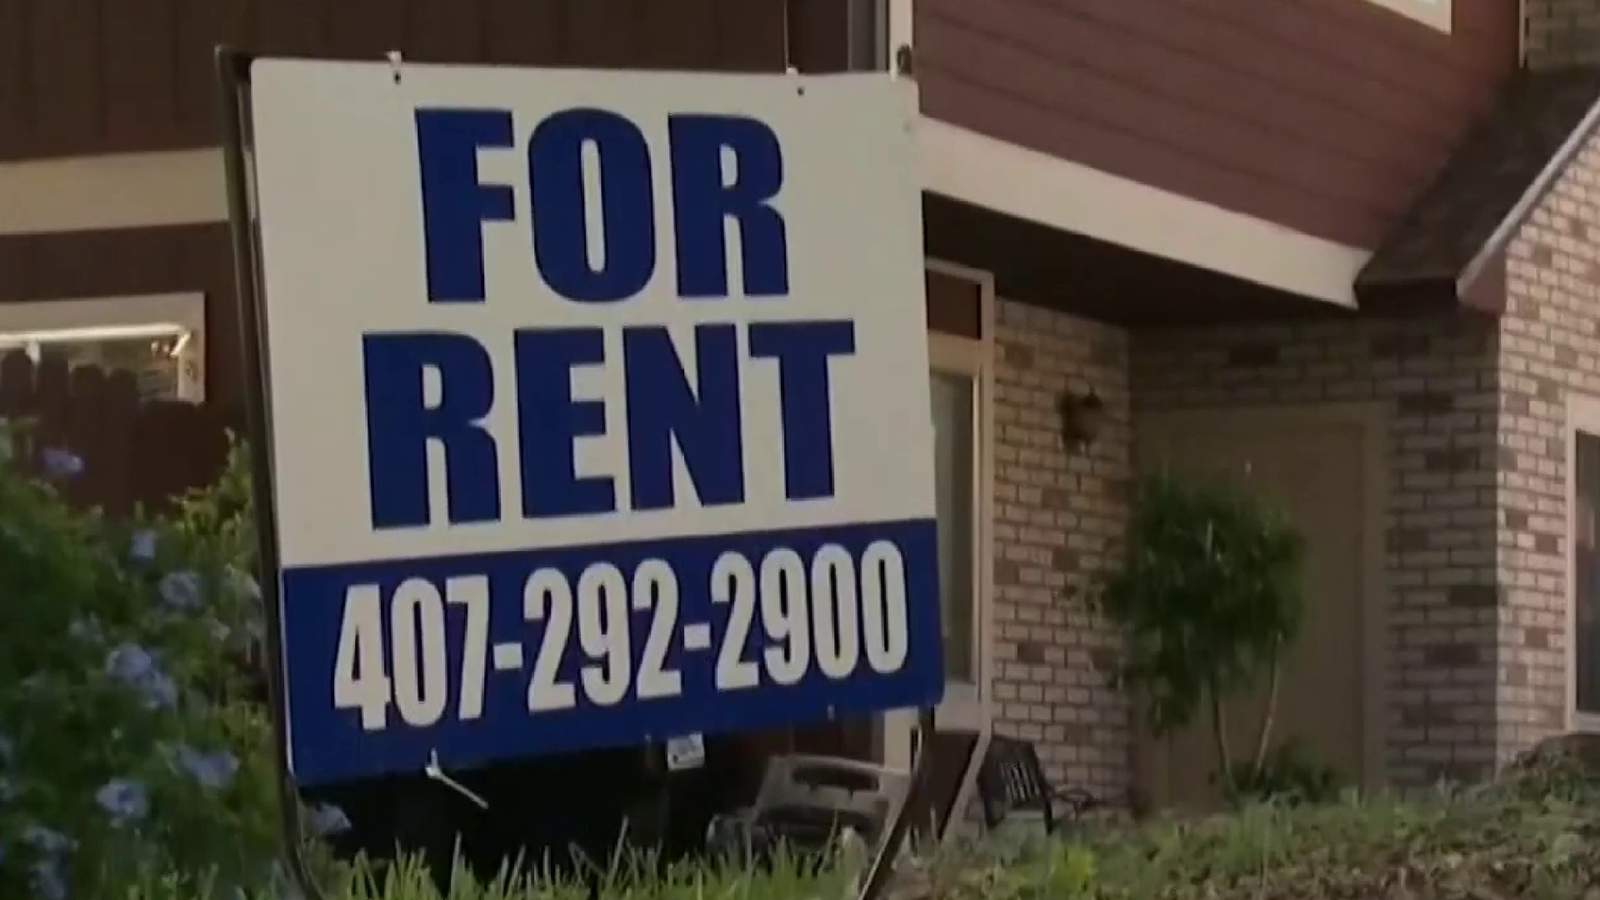 Gov. DeSantis extends temporary ban on evictions hours before it was set to expire